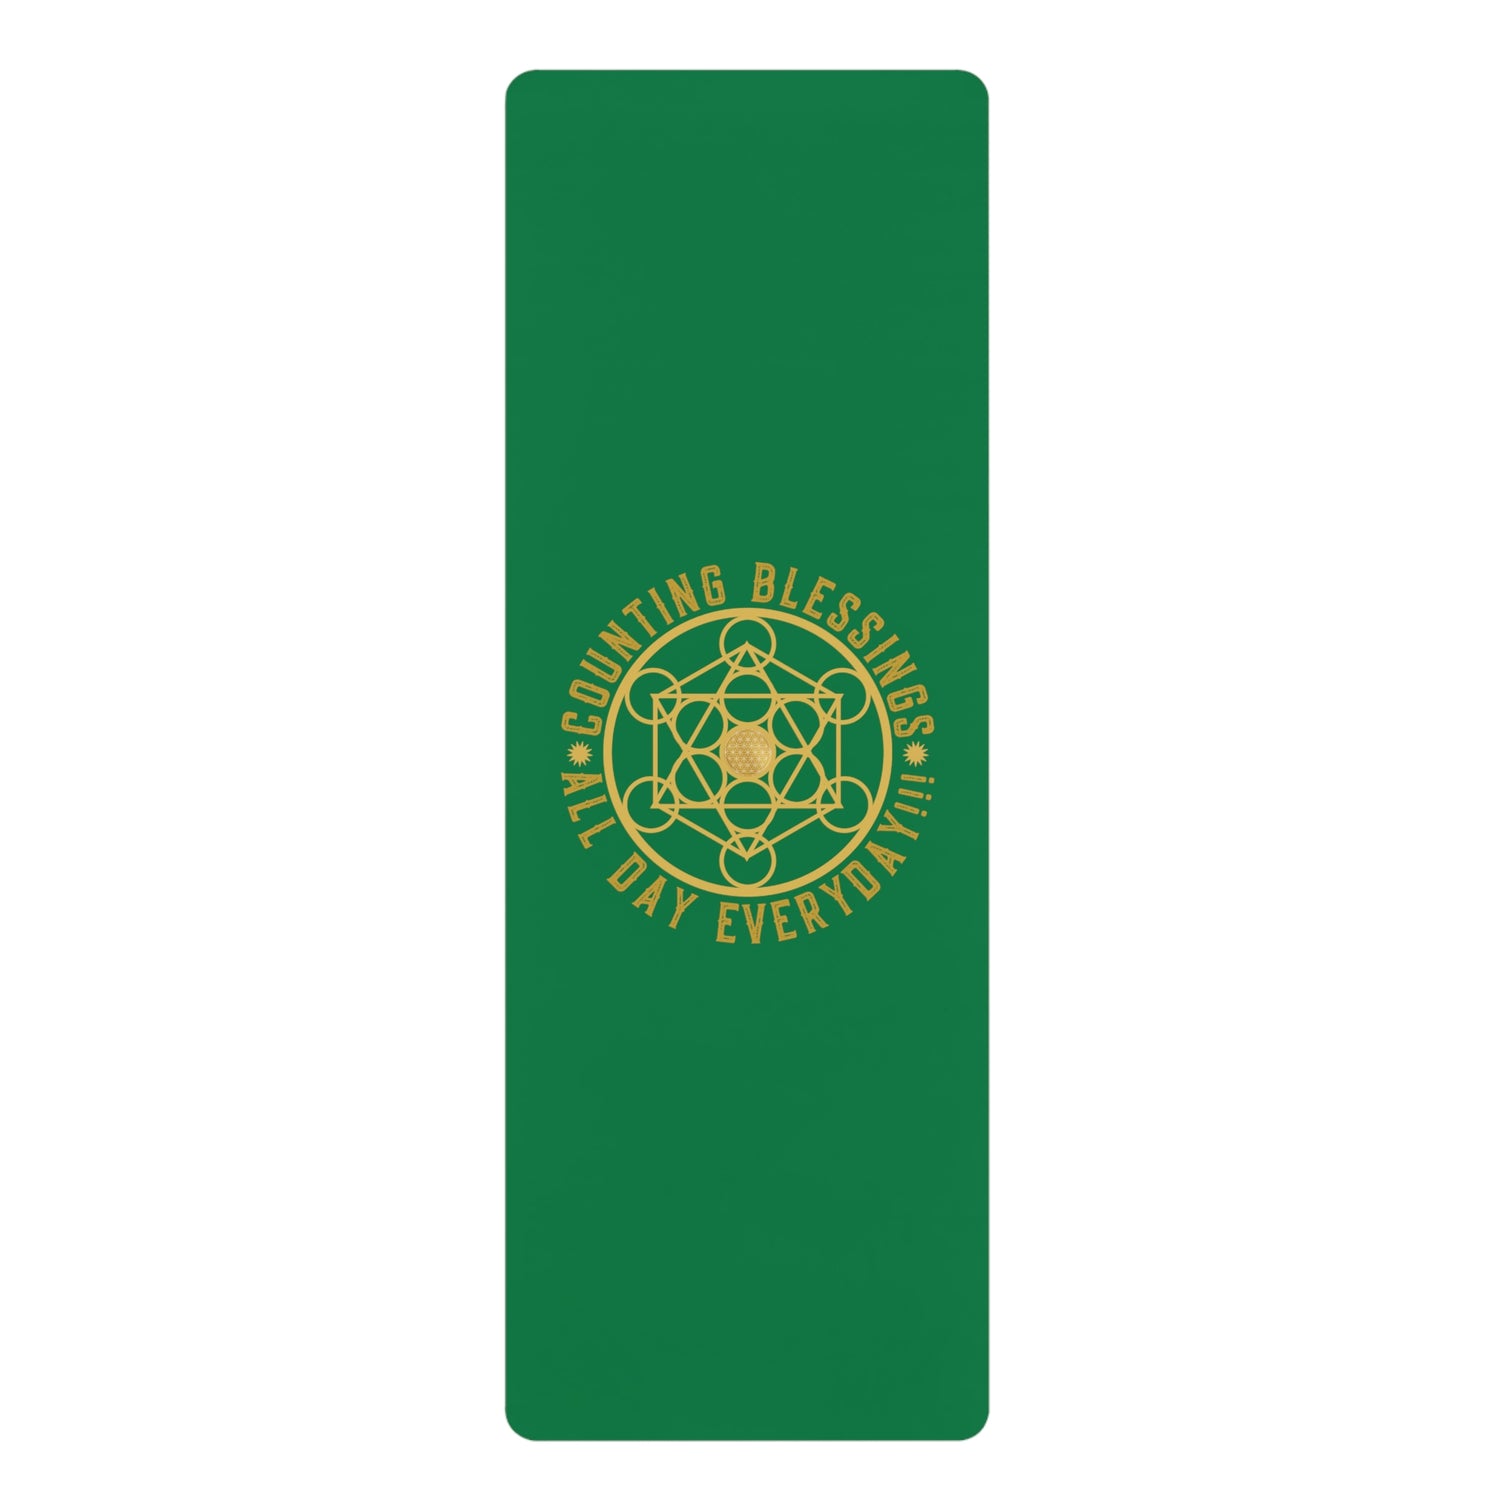 COUNTING BLESSINGS ALL DAY EVERYDAY!!! - Rubber Yoga Mat - Green